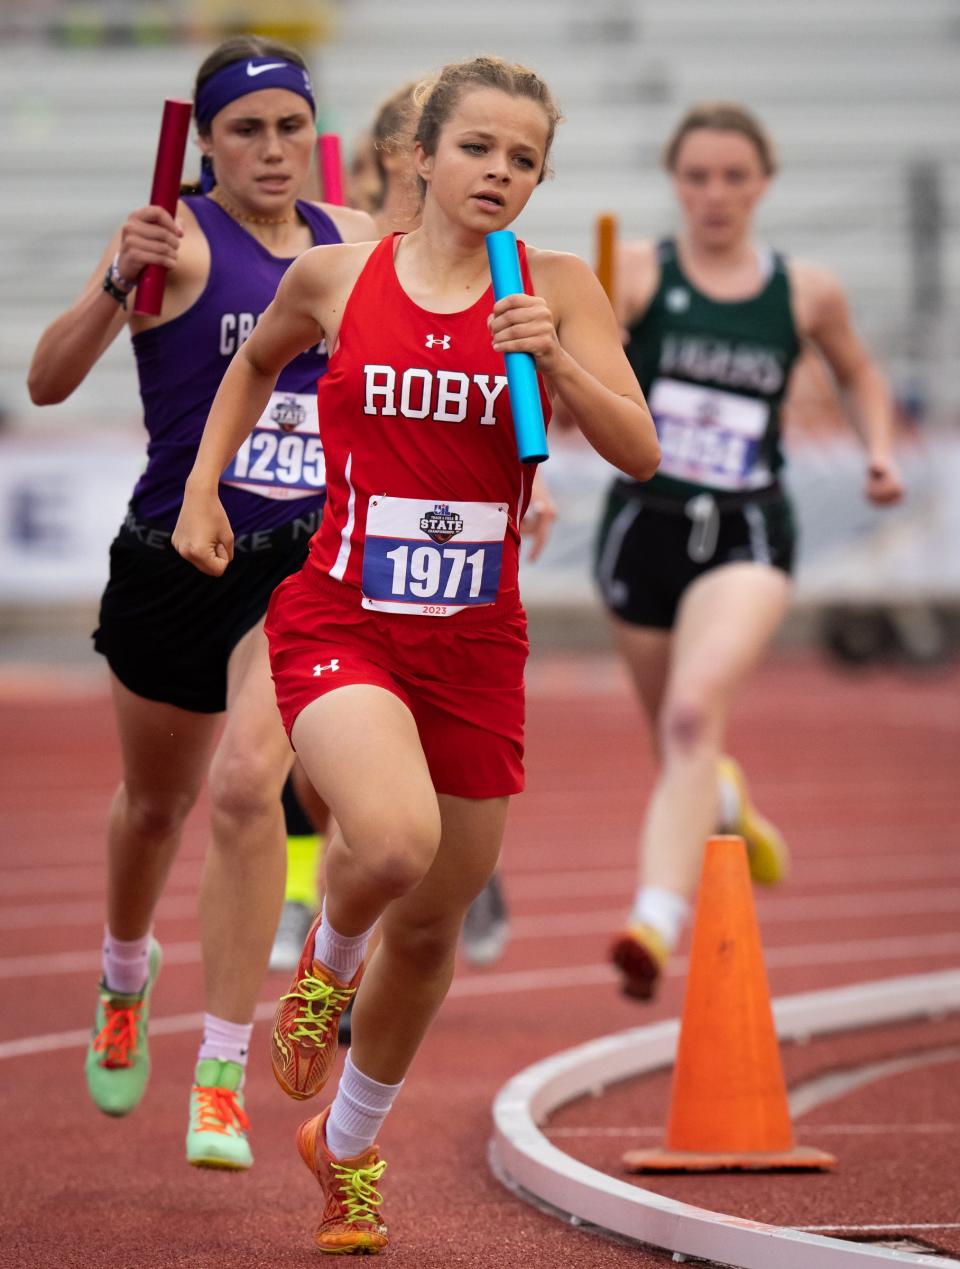 A Roby athlete competes in the girls' 1,600-meter relay at the state meet Saturday at Mike A. Myers Stadium in Austin. The Roby team finished second with a time of 4:12.15.